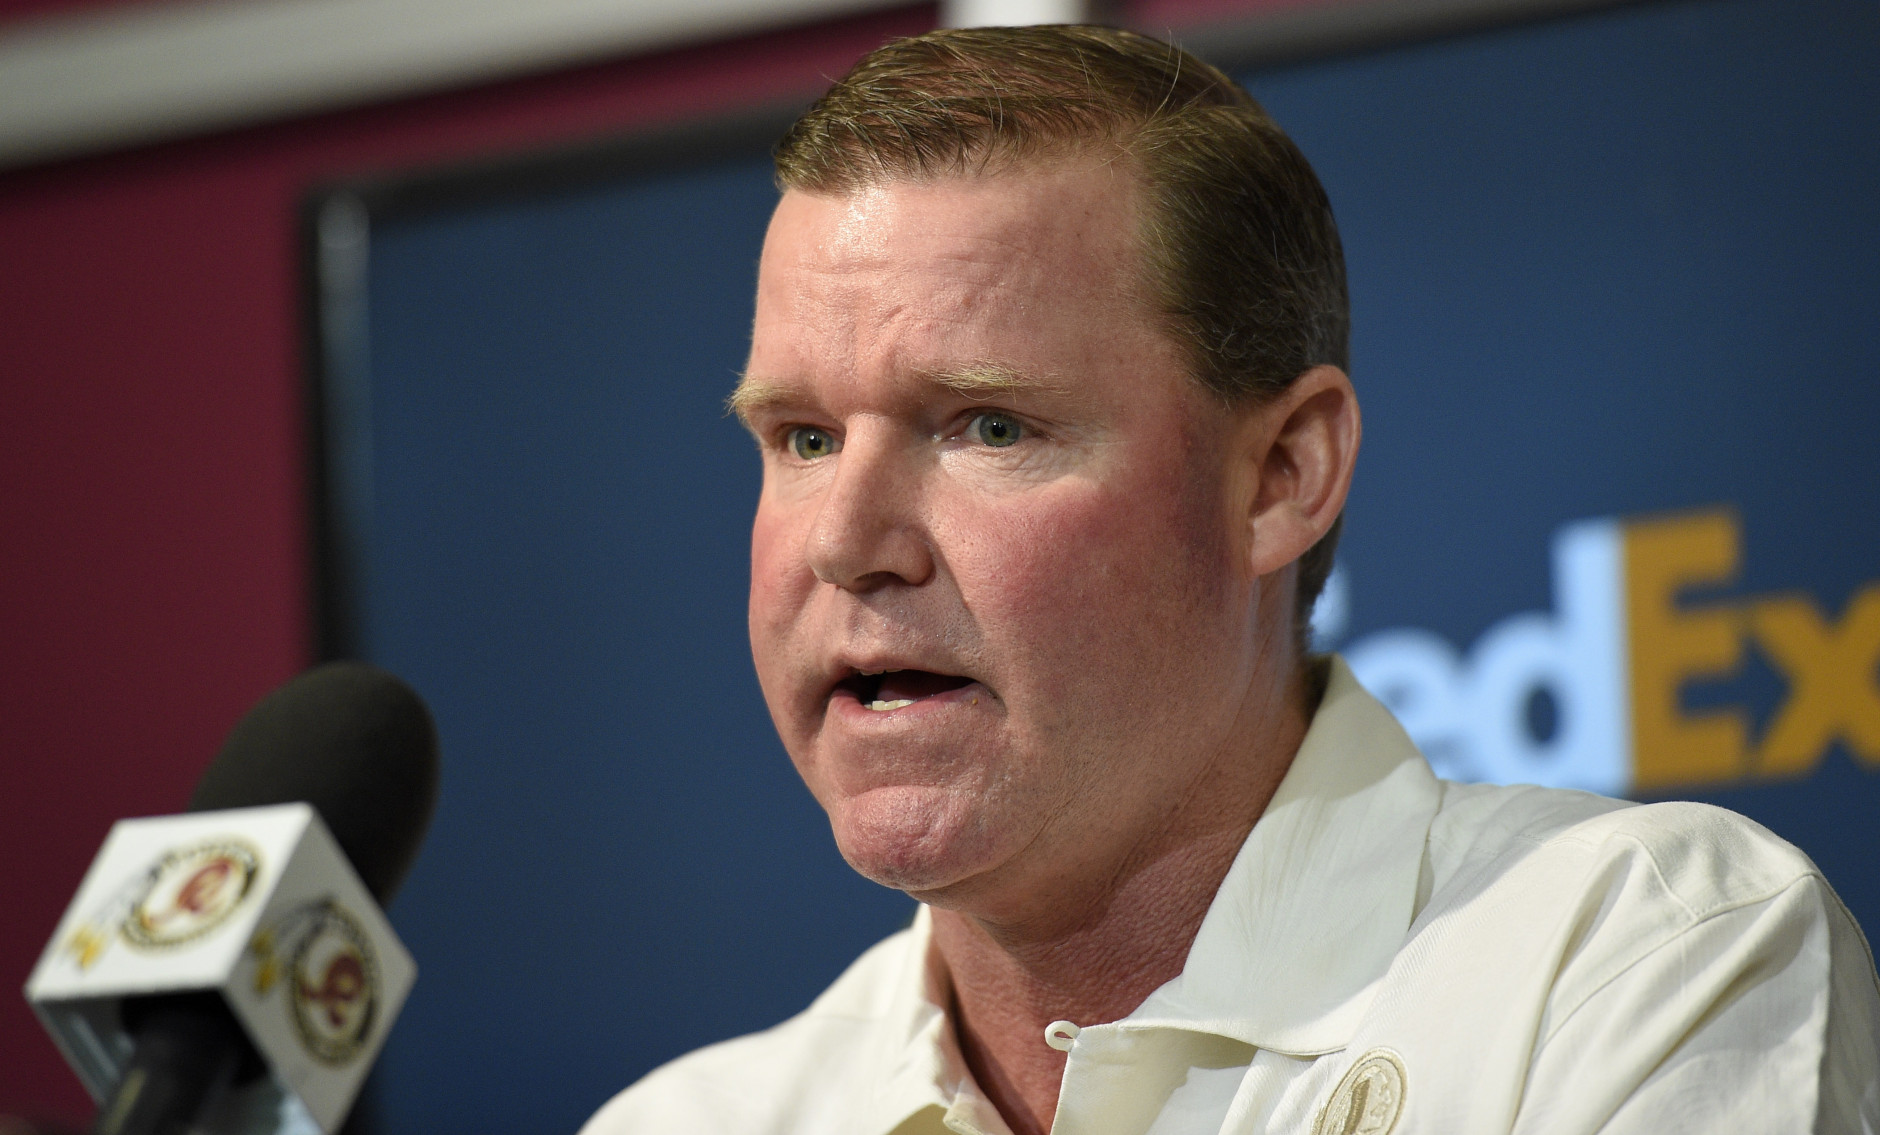 FILE - In this April 27, 2015, file photo, Washington Redskins general manager Scot McCloughan speaks to the media during a pre-draft NFL football news conference in Ashburn, Va. (AP Photo/Nick Wass, File)